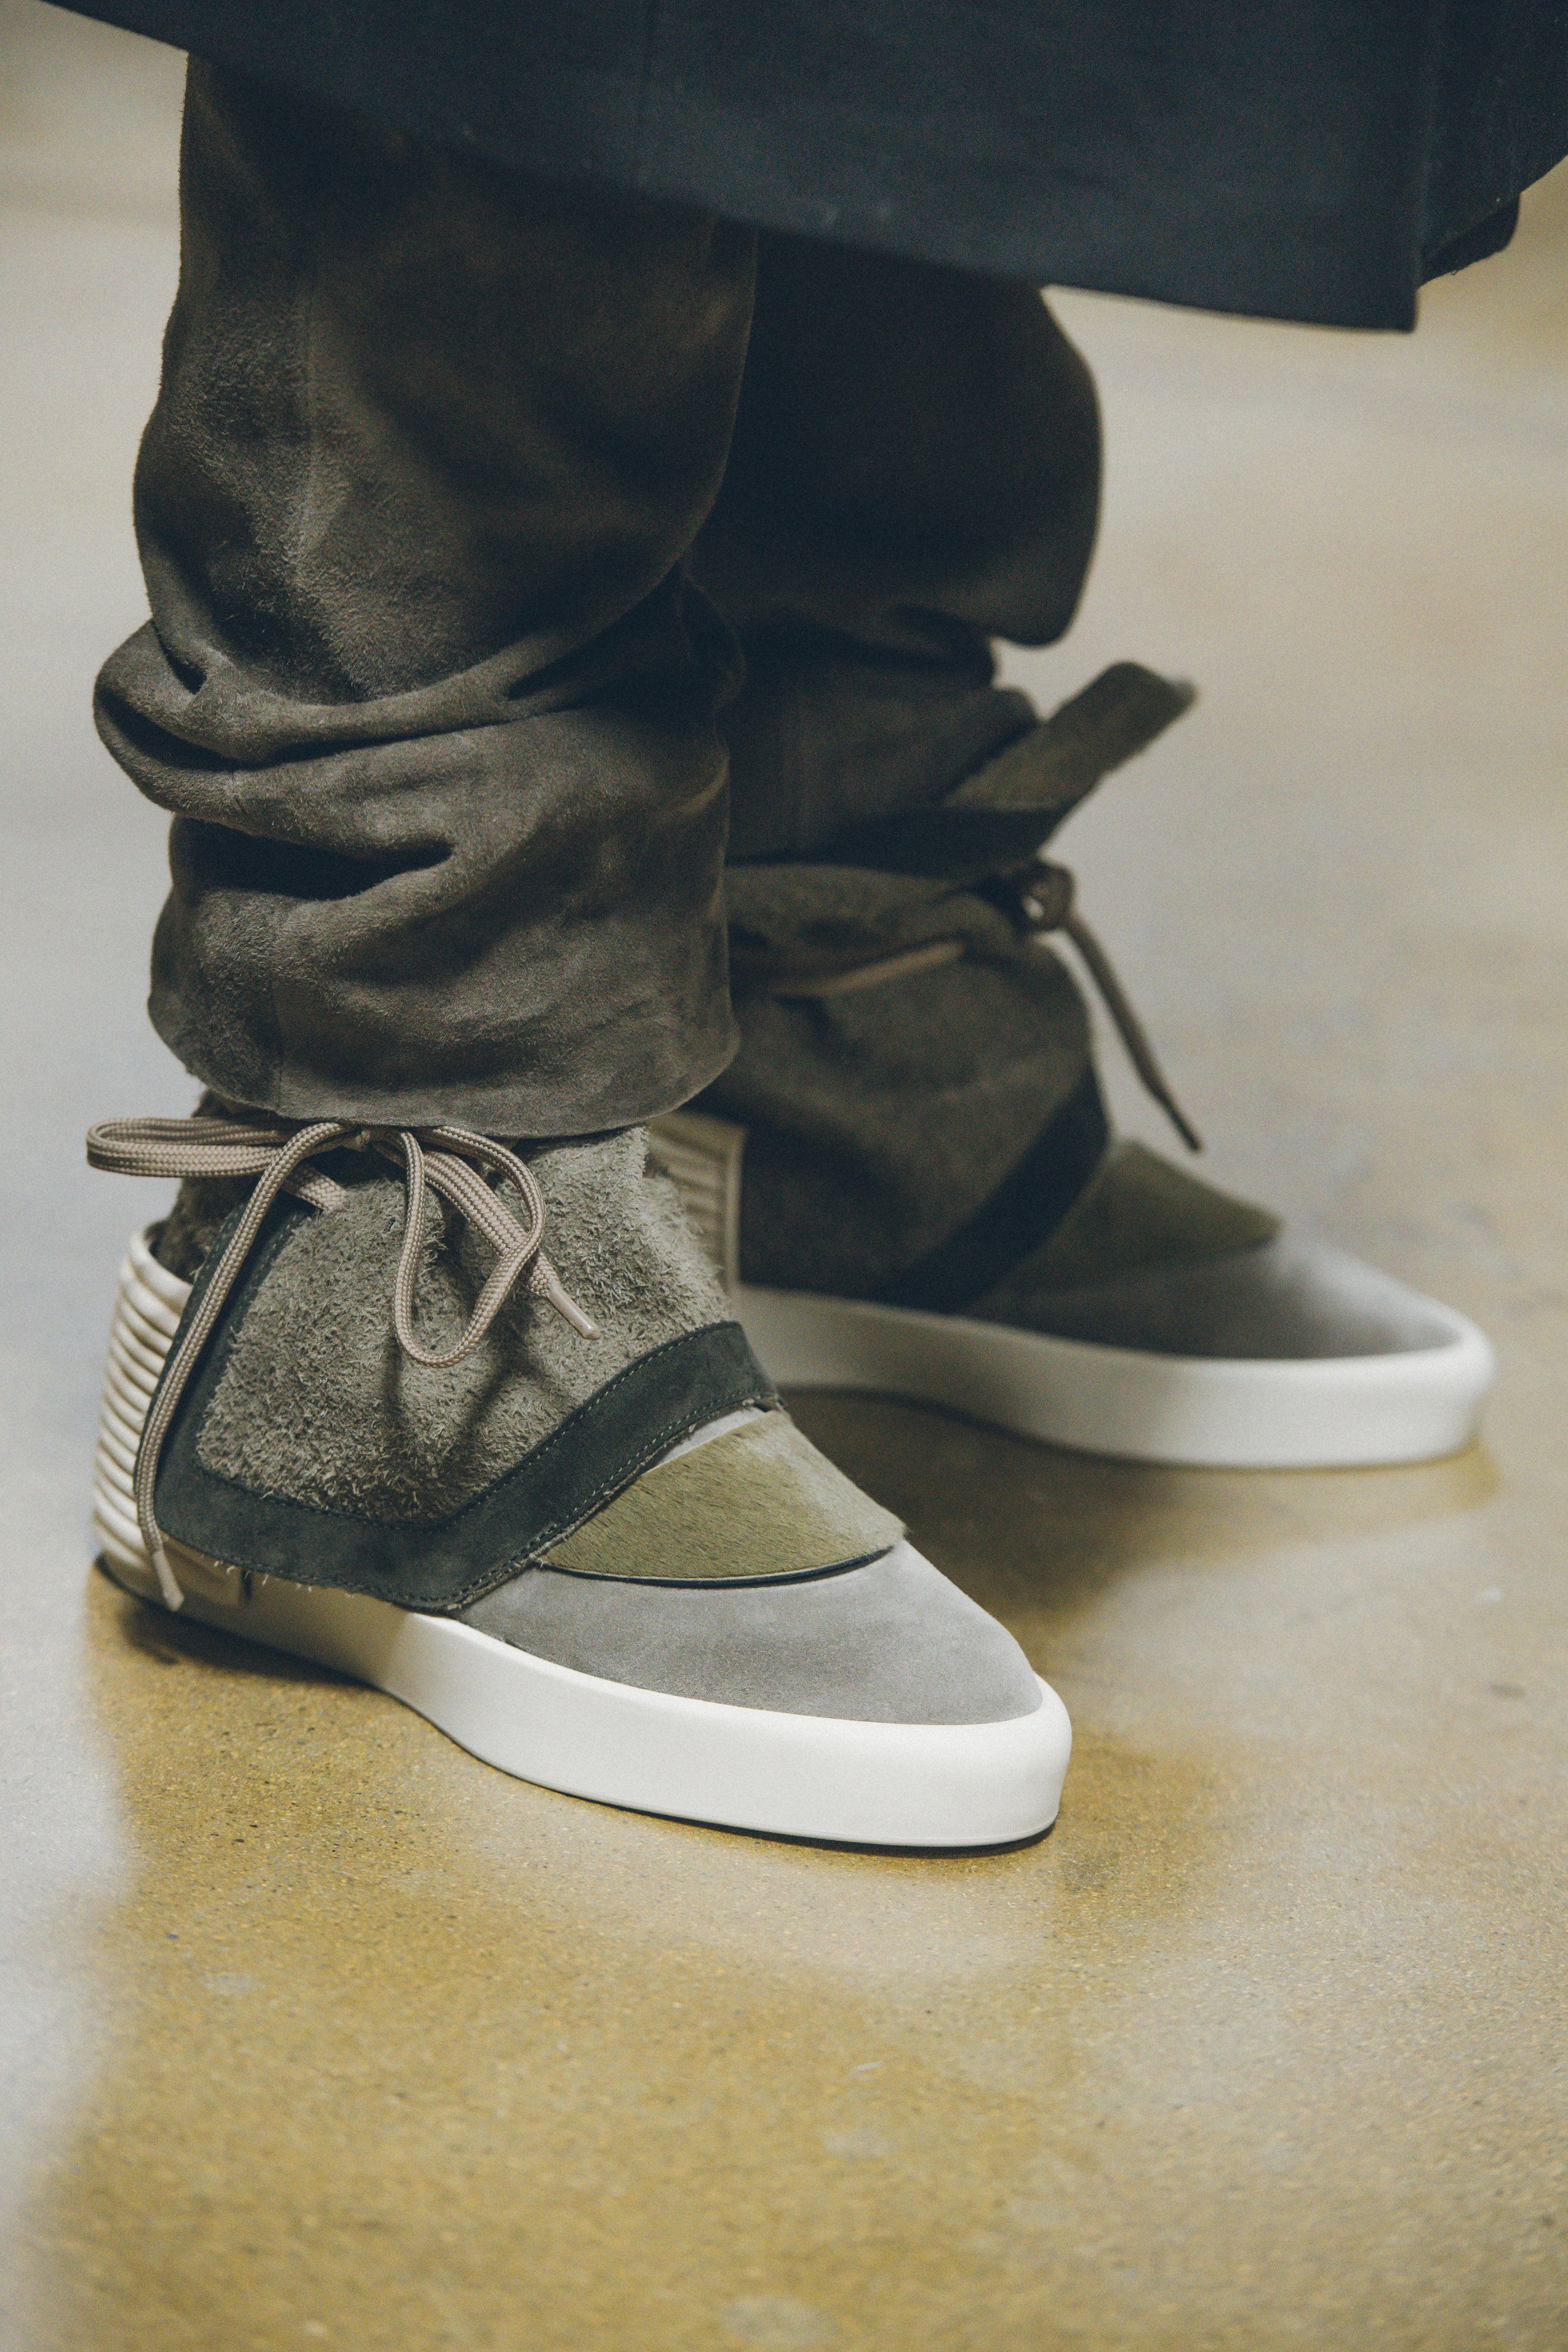 Fear of God's two-year process on developing its footwear, and how